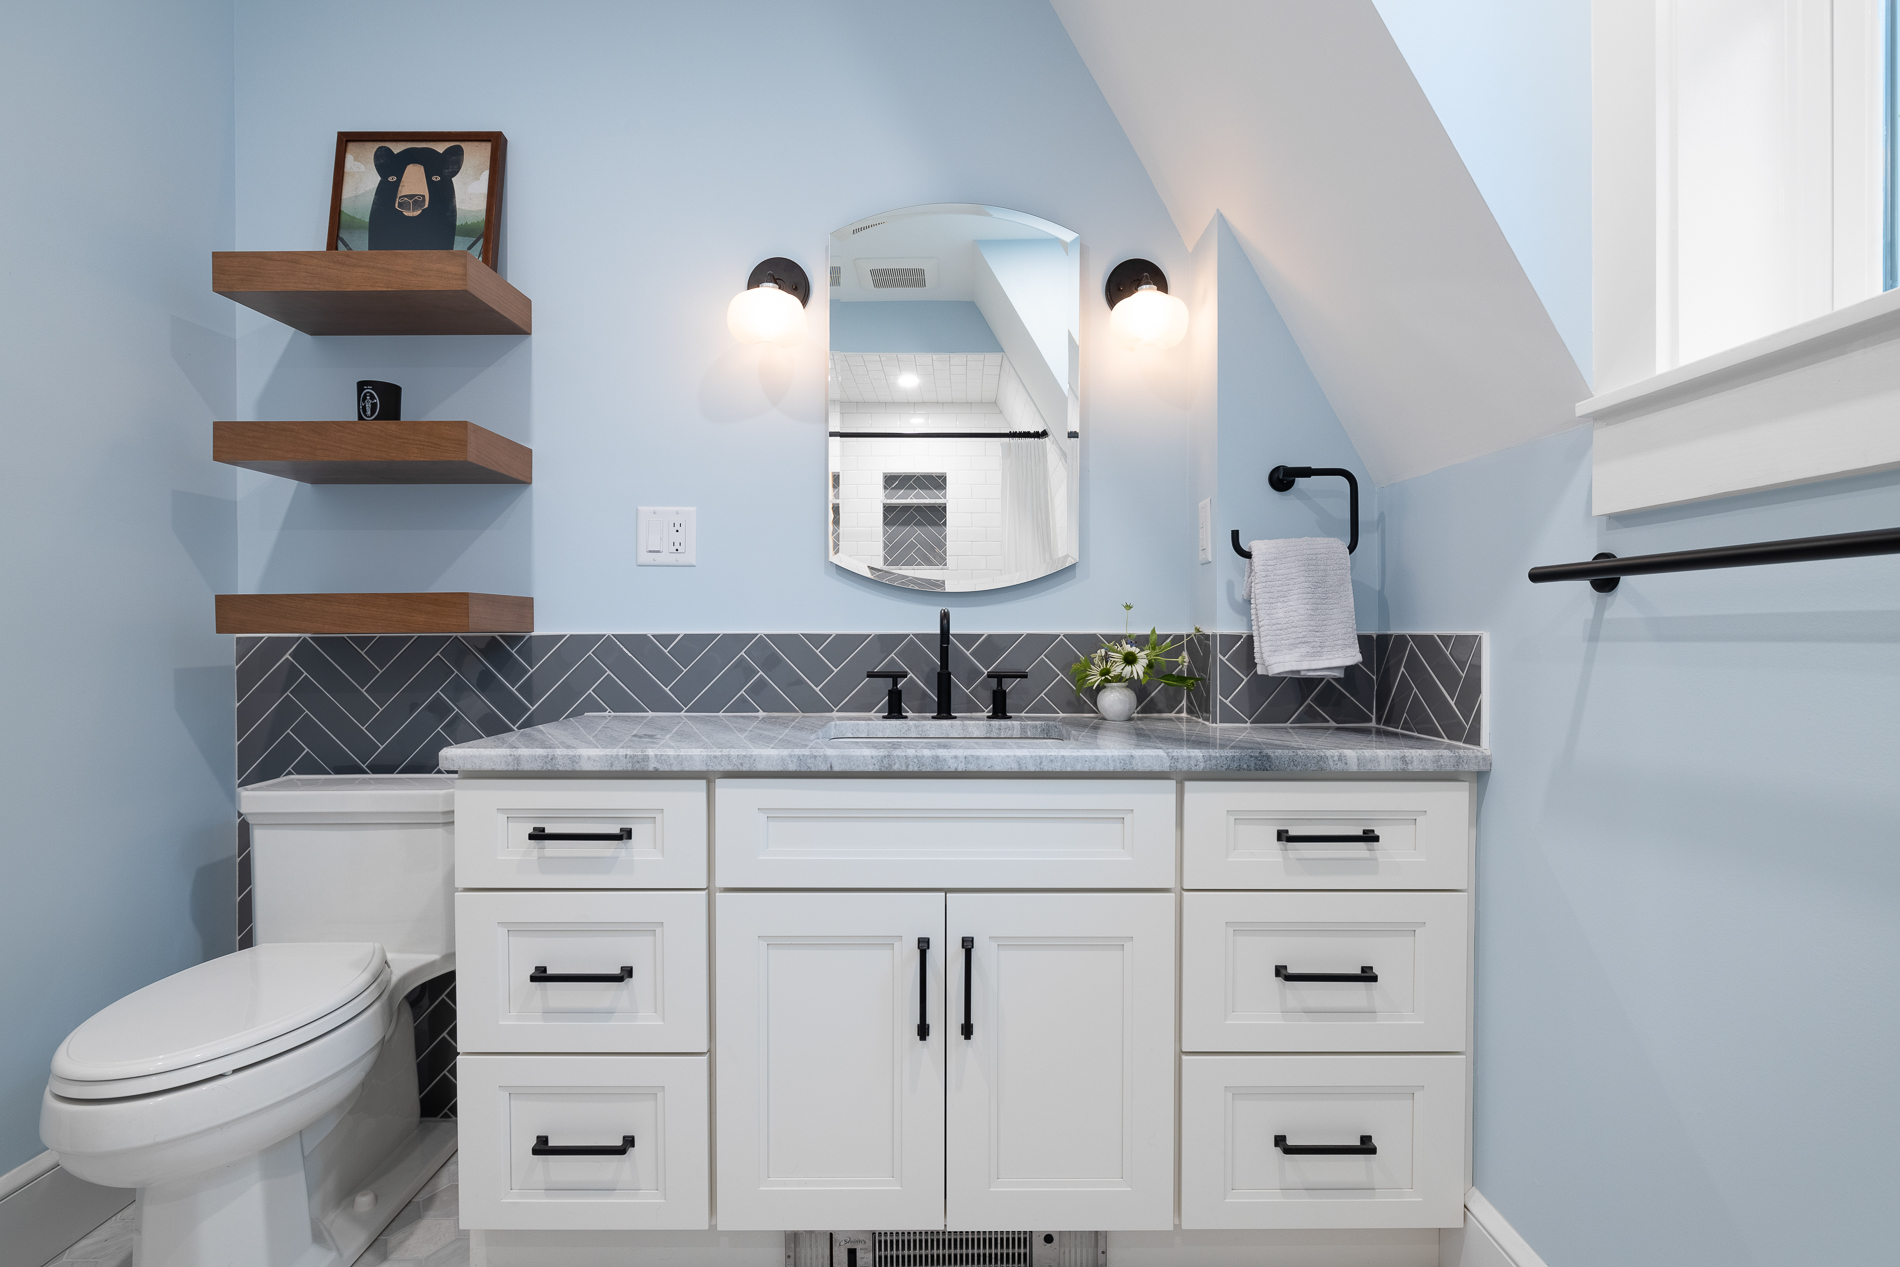 Gas Range Stovetop with Blue and White Subway Tile